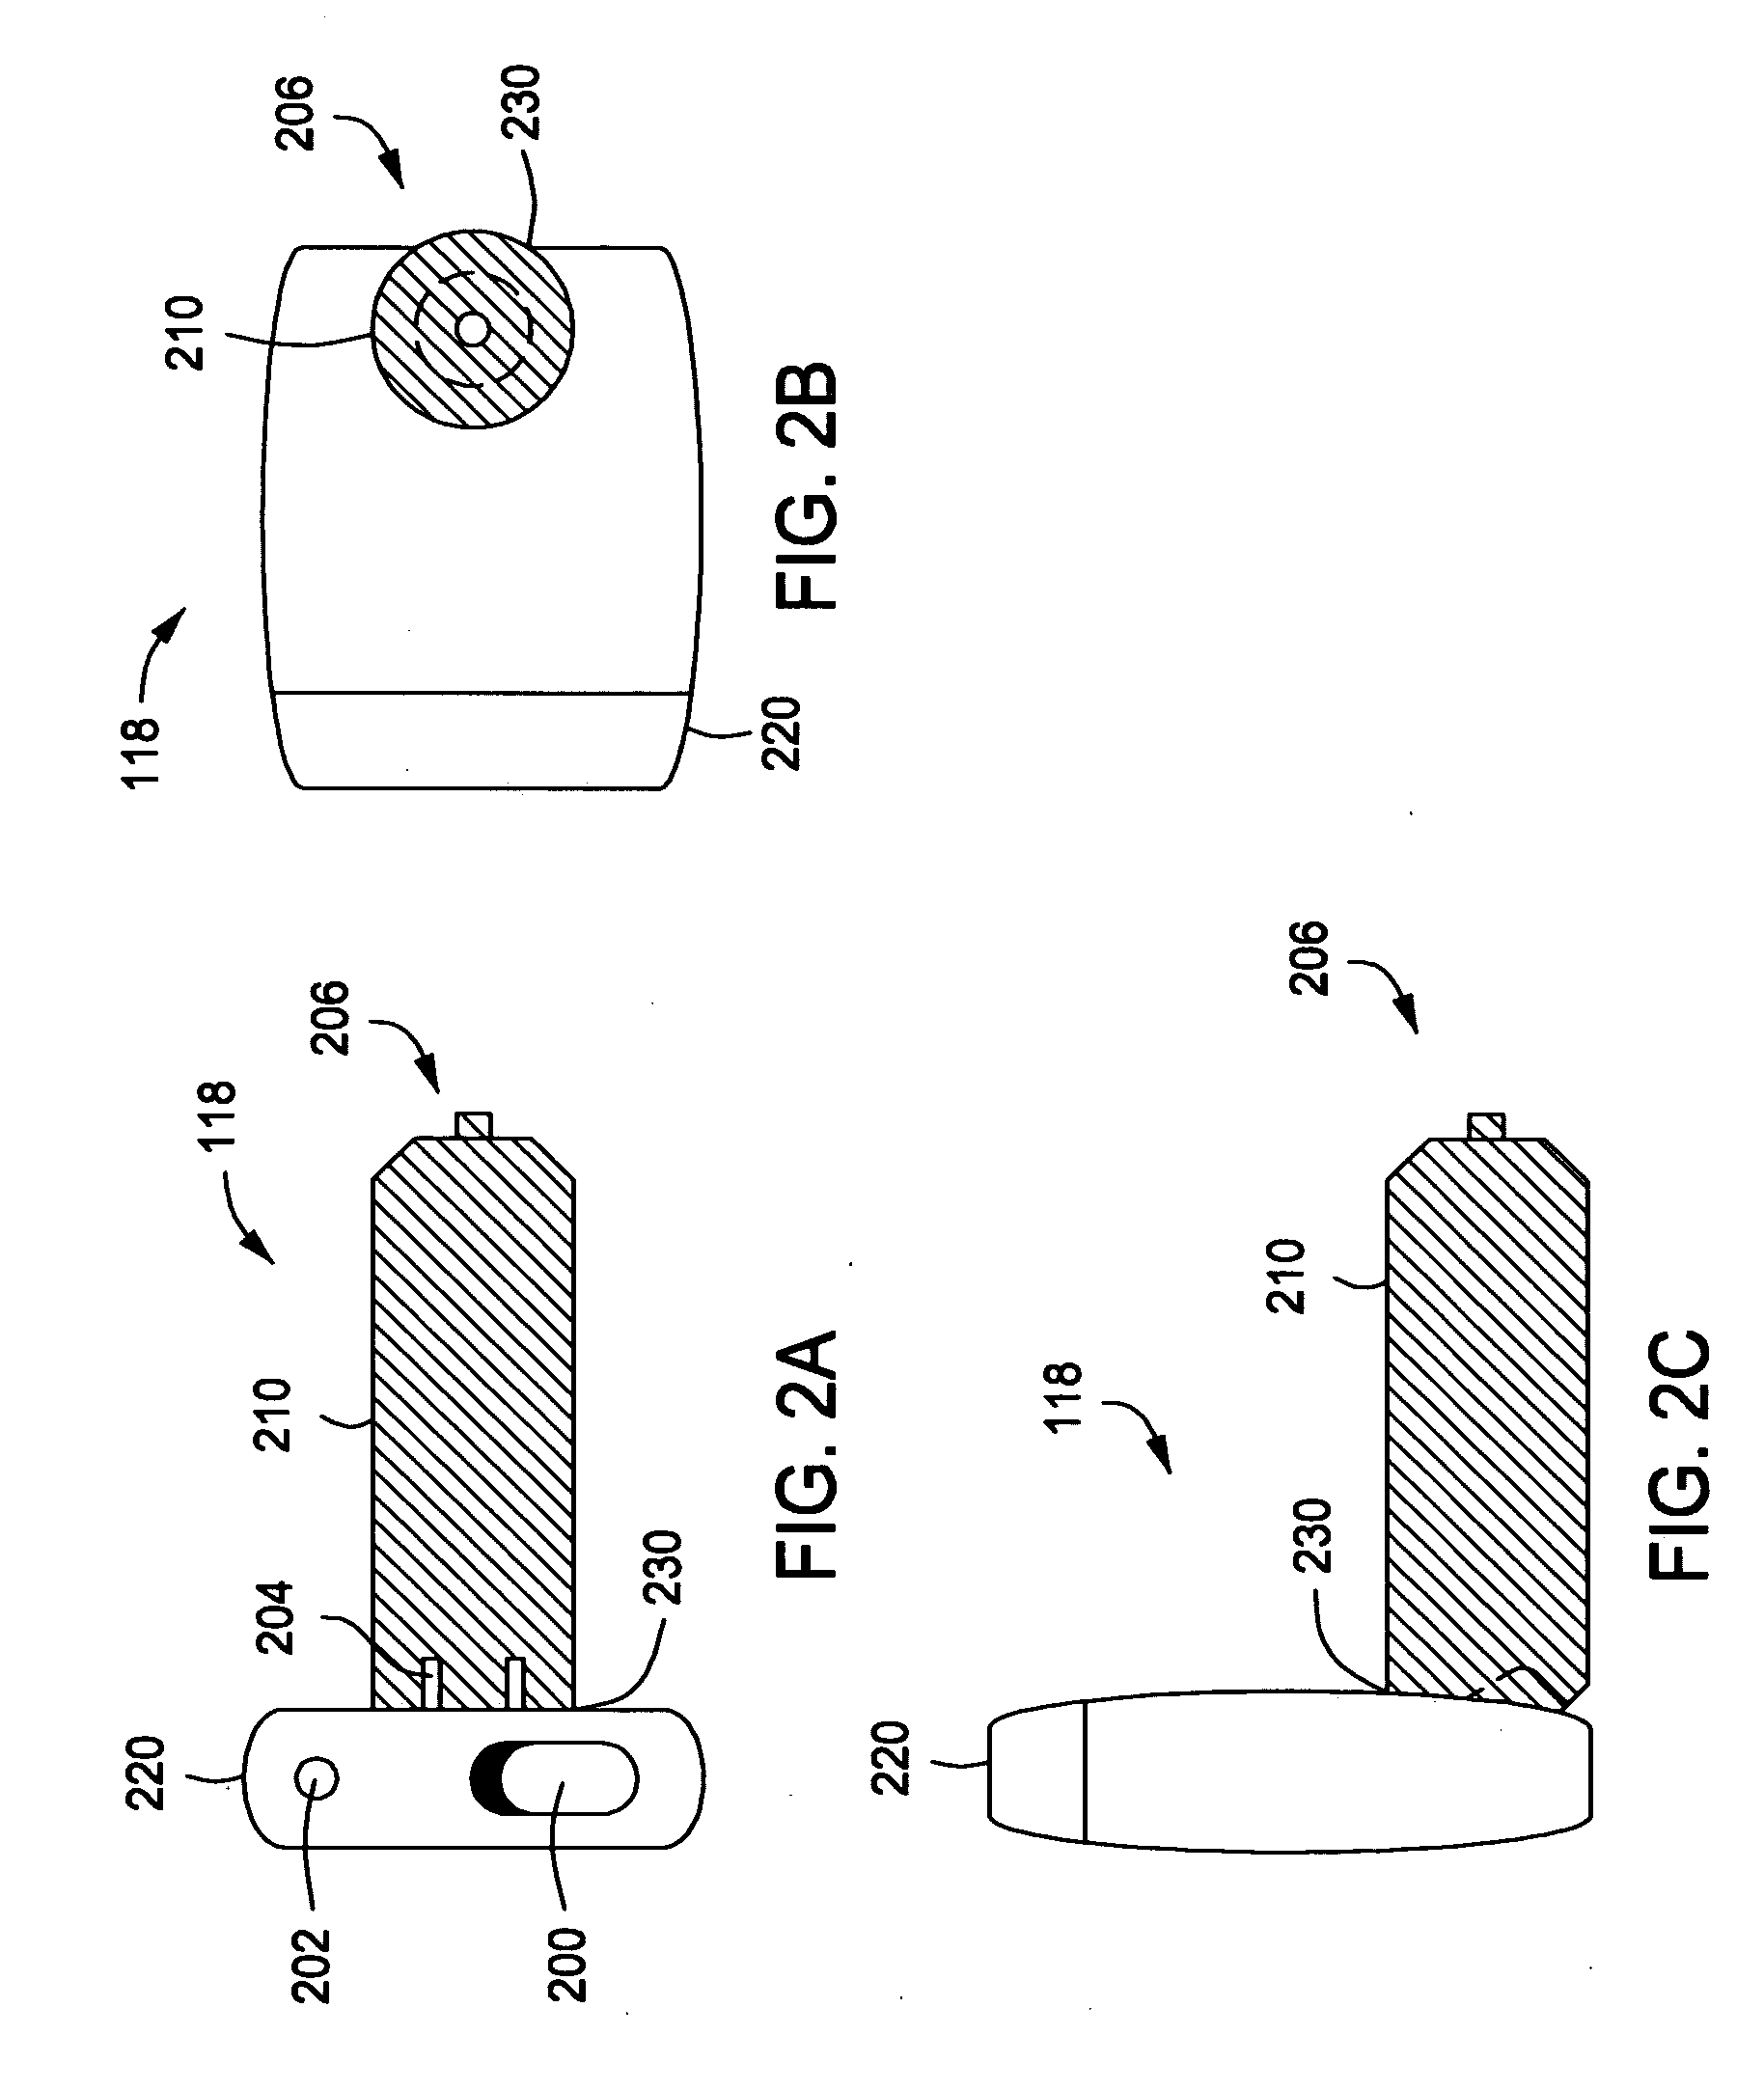 Satellite-positioning-system tracking device and method for determining a position of the same